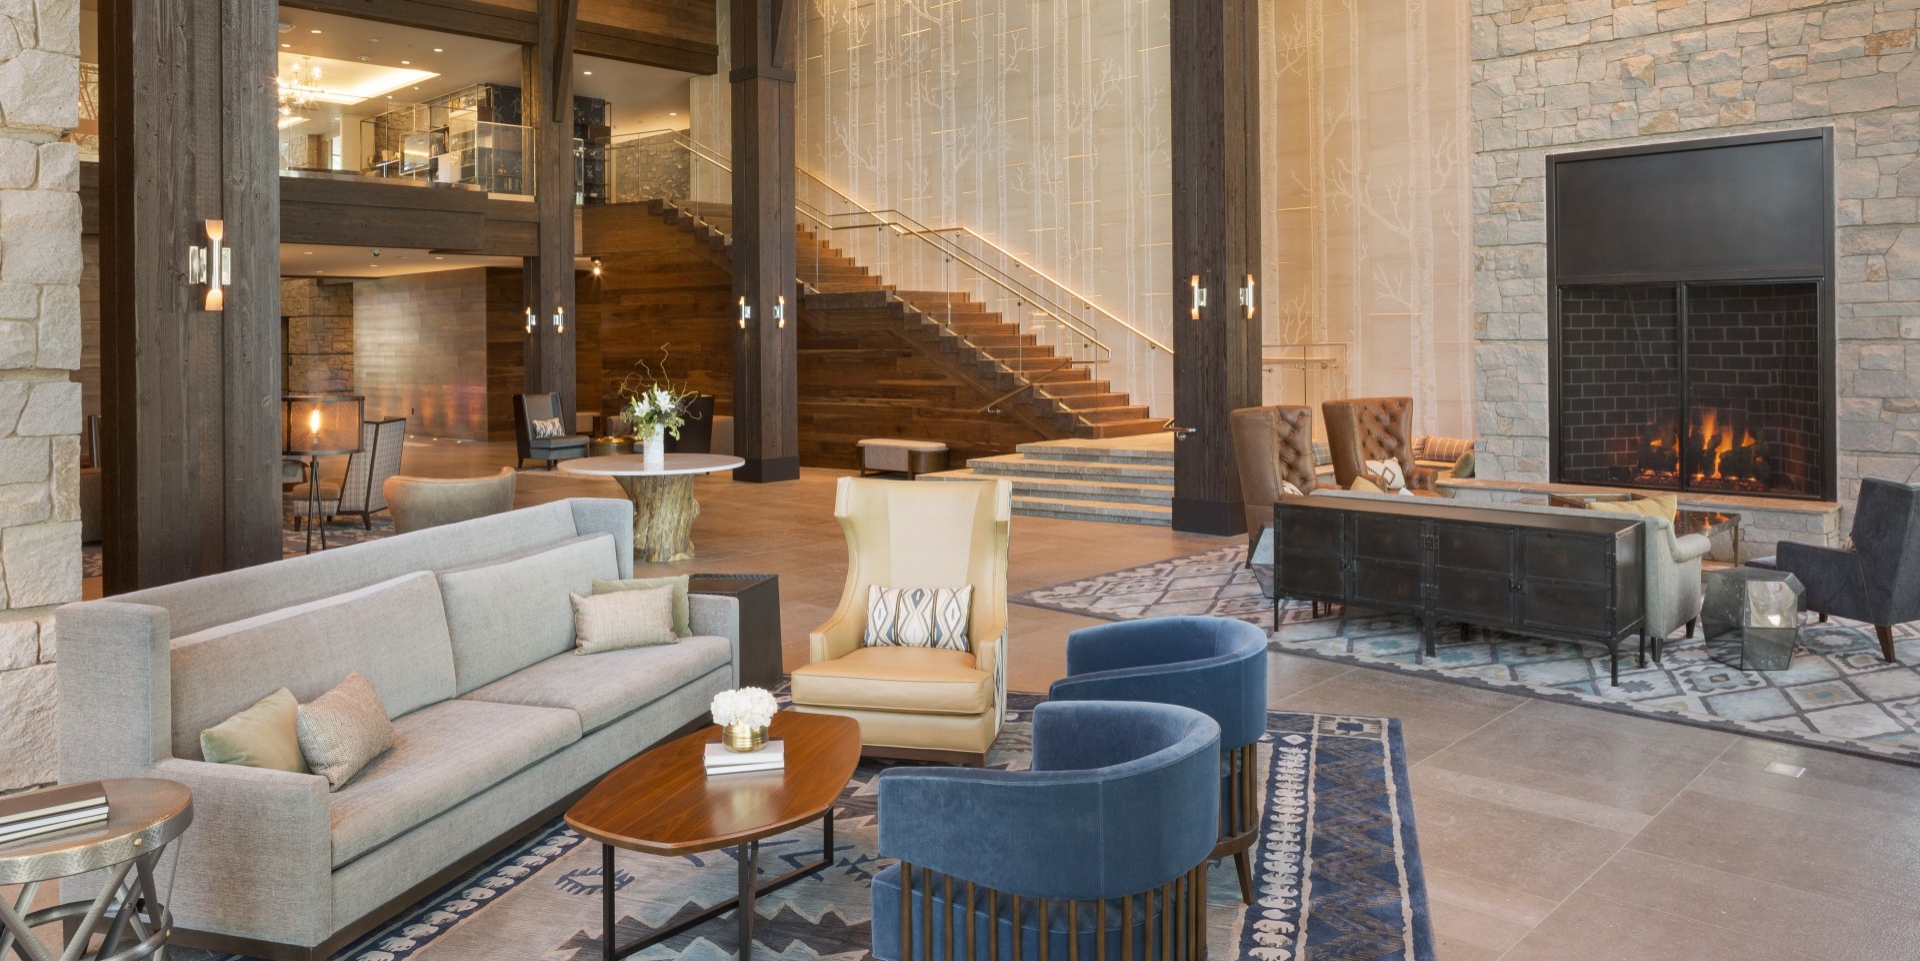 10 Latest Hotel Interior Design by HBA you Must Know